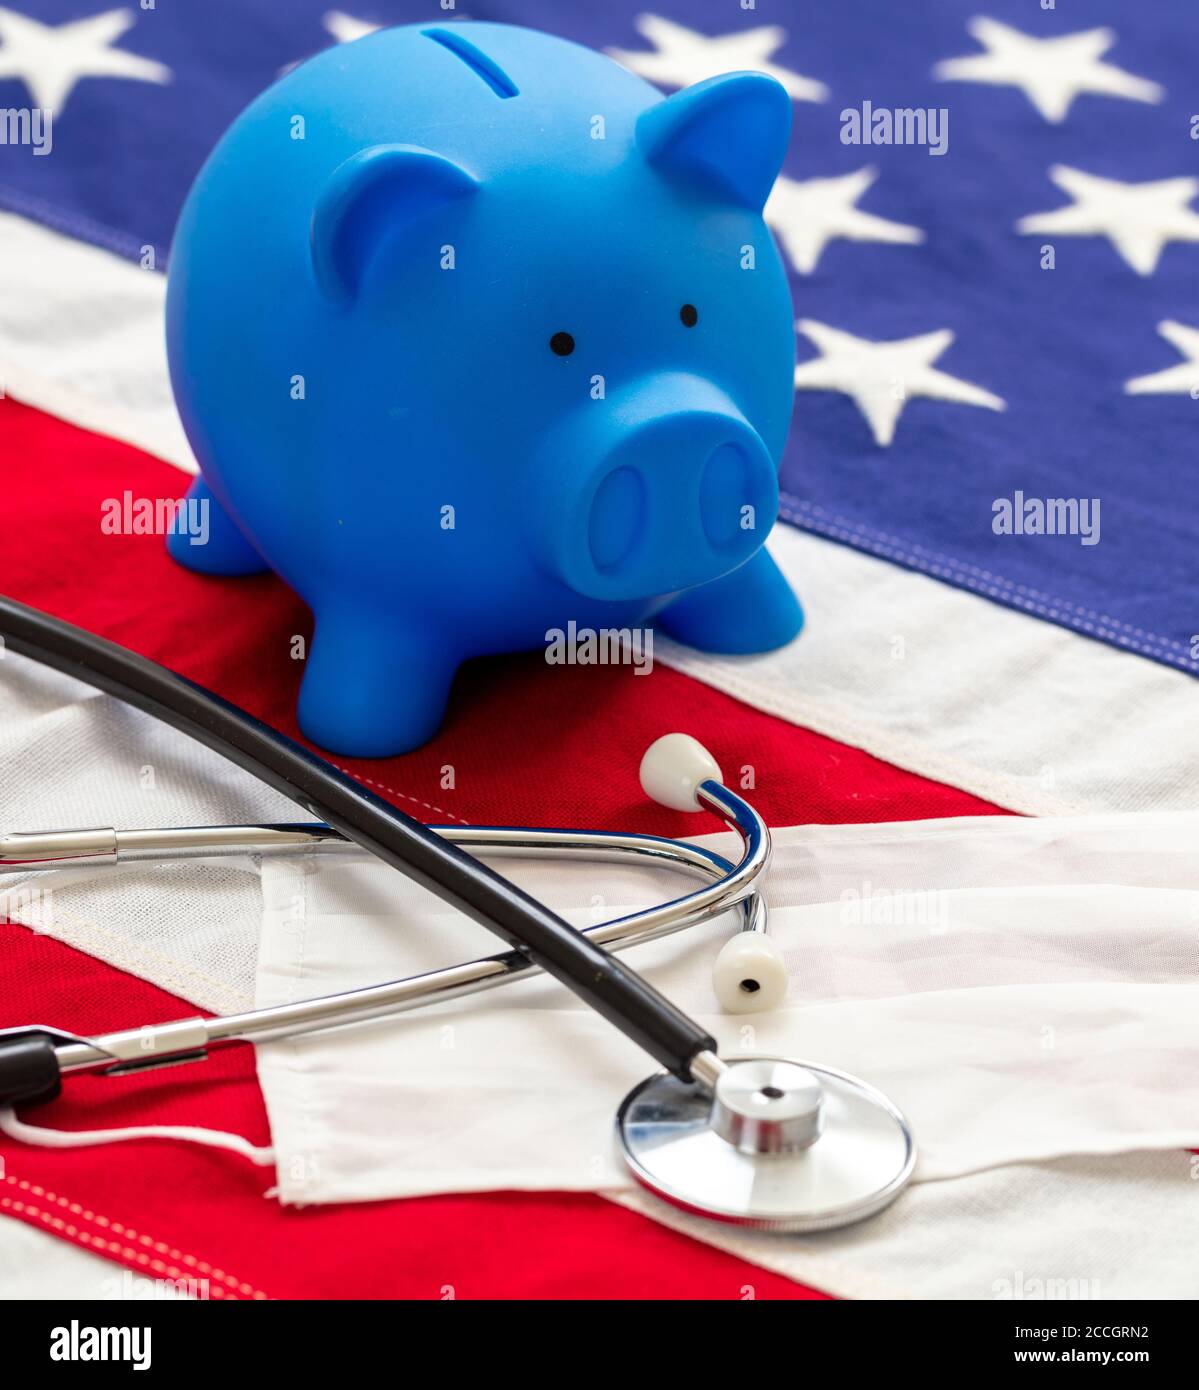 USA health care cost, coronavirus days. Medical stethoscope, protective face mask and piggy bank on a US of America flag, banner. Stock Photo